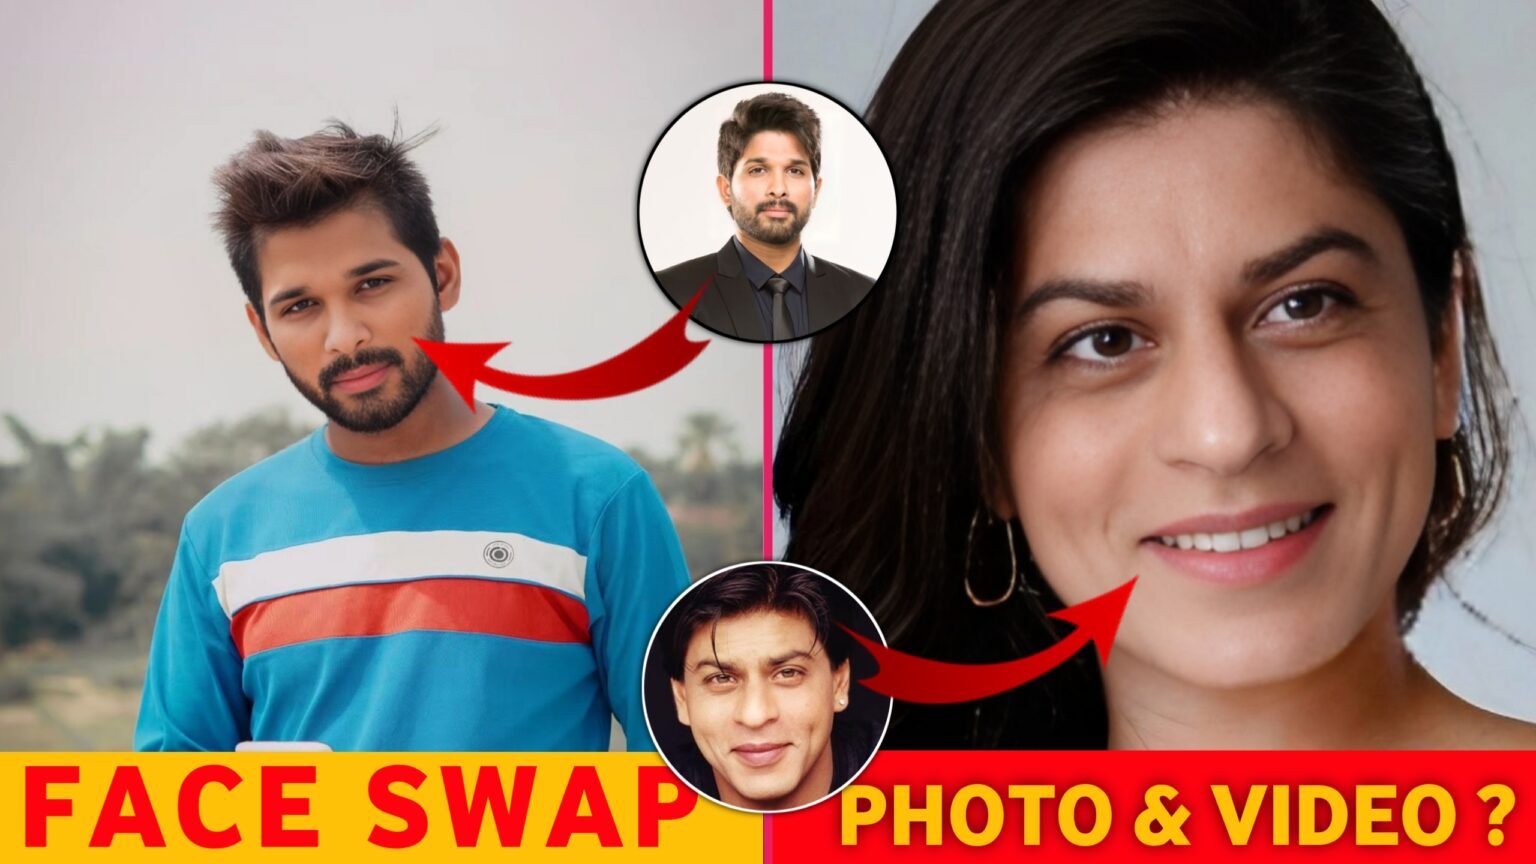 How To Change Face In Photo Online